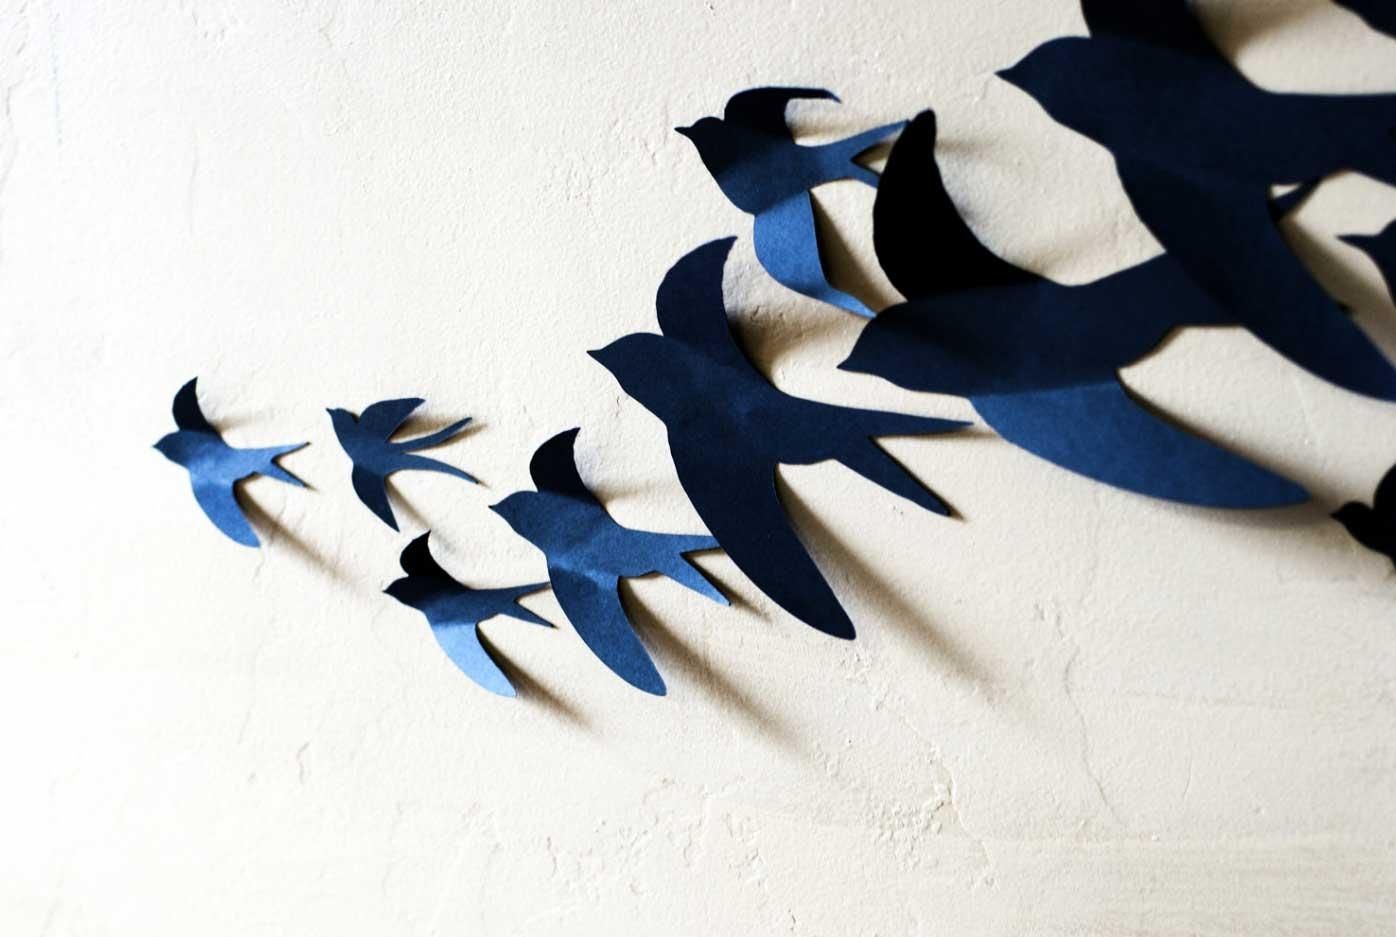 Superb Birds On Wire Canvas Wall Art D Birds Wall Art Three Flying Intended For Metal Wall Art Birds In Flight (View 10 of 20)